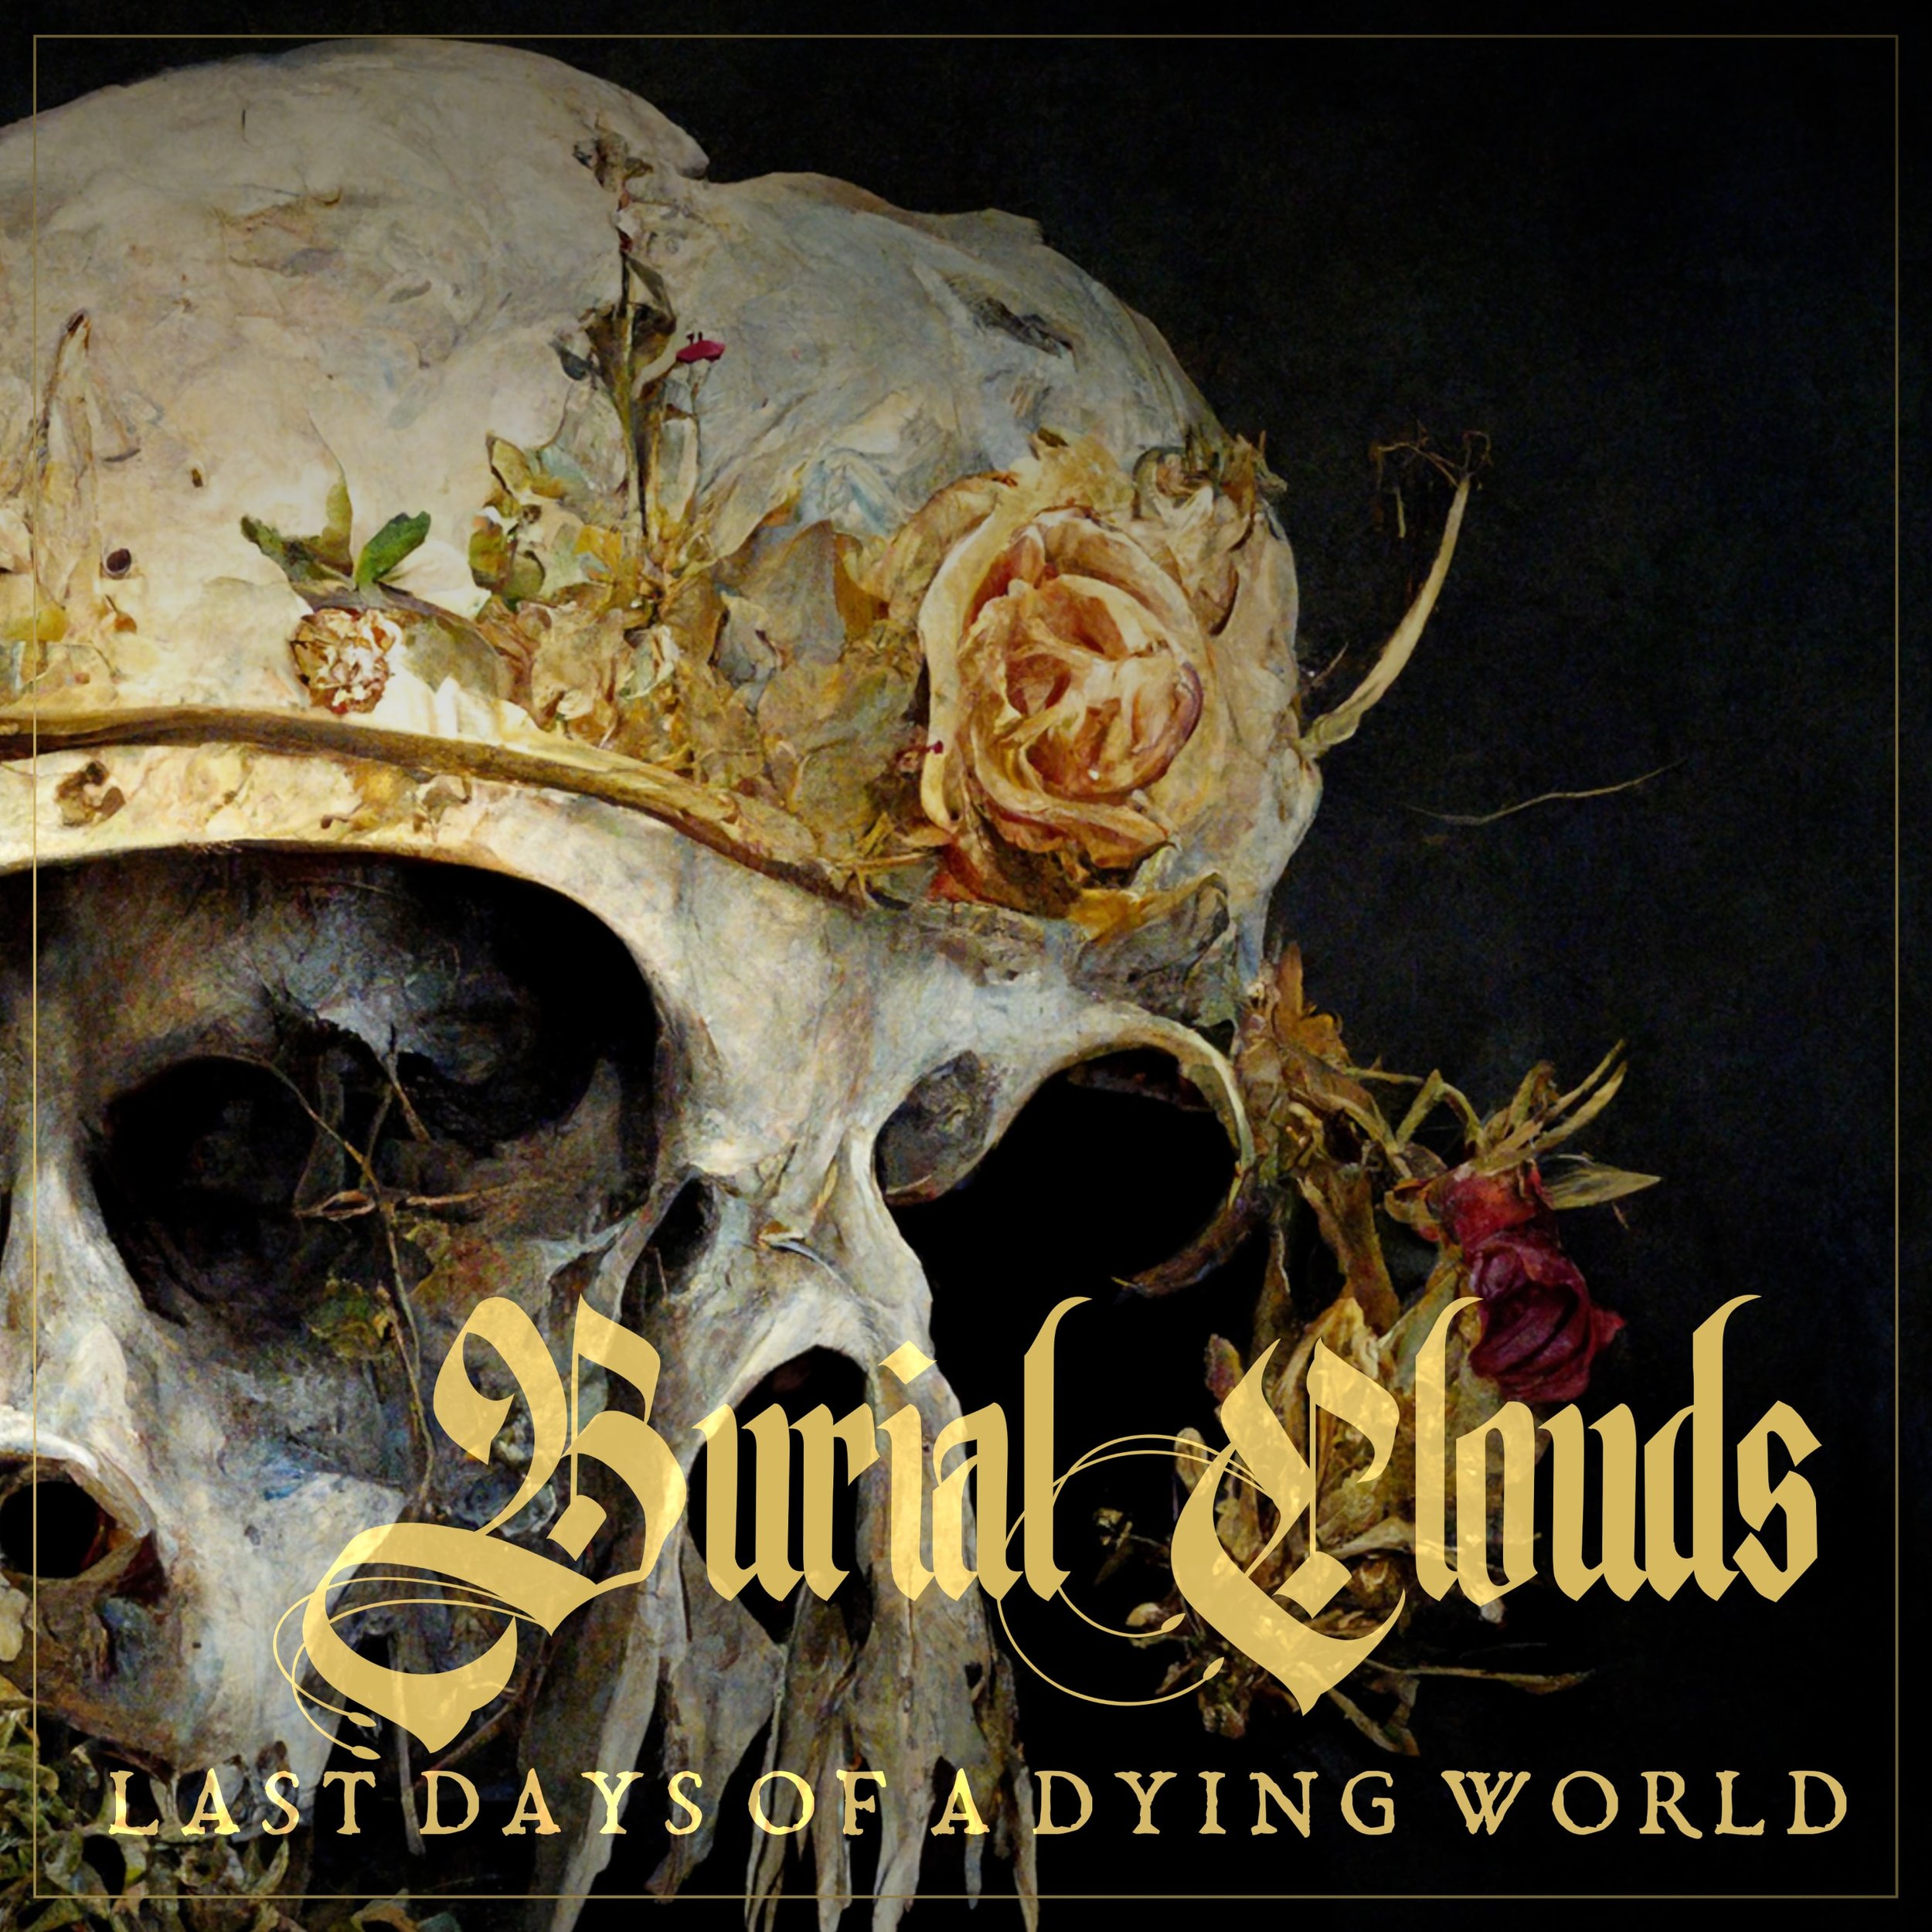 Burial Clouds - Last Day Of A Dying World - Cover.jpg